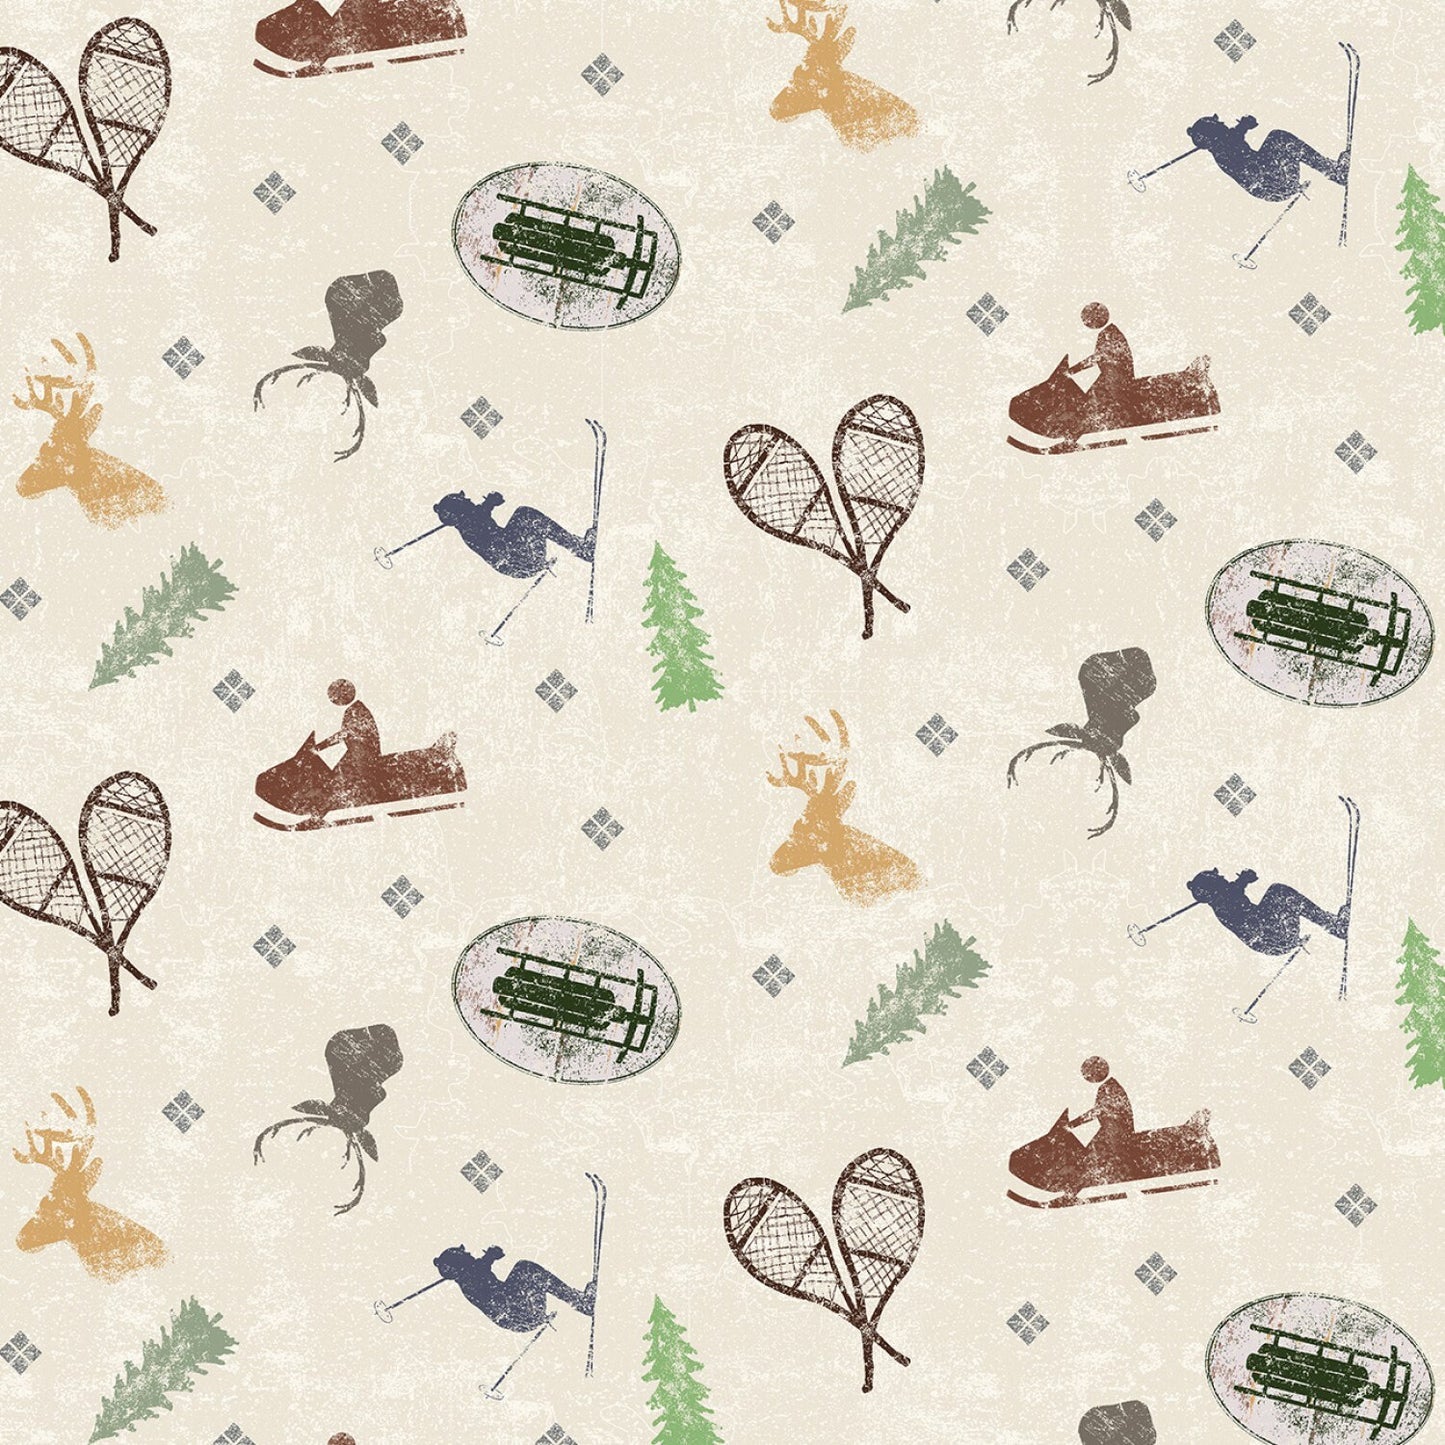 Winter Playground by Dan DiPaolo Light Khaki Winter Playground Equipment Y2766-11 Cotton Woven Fabric